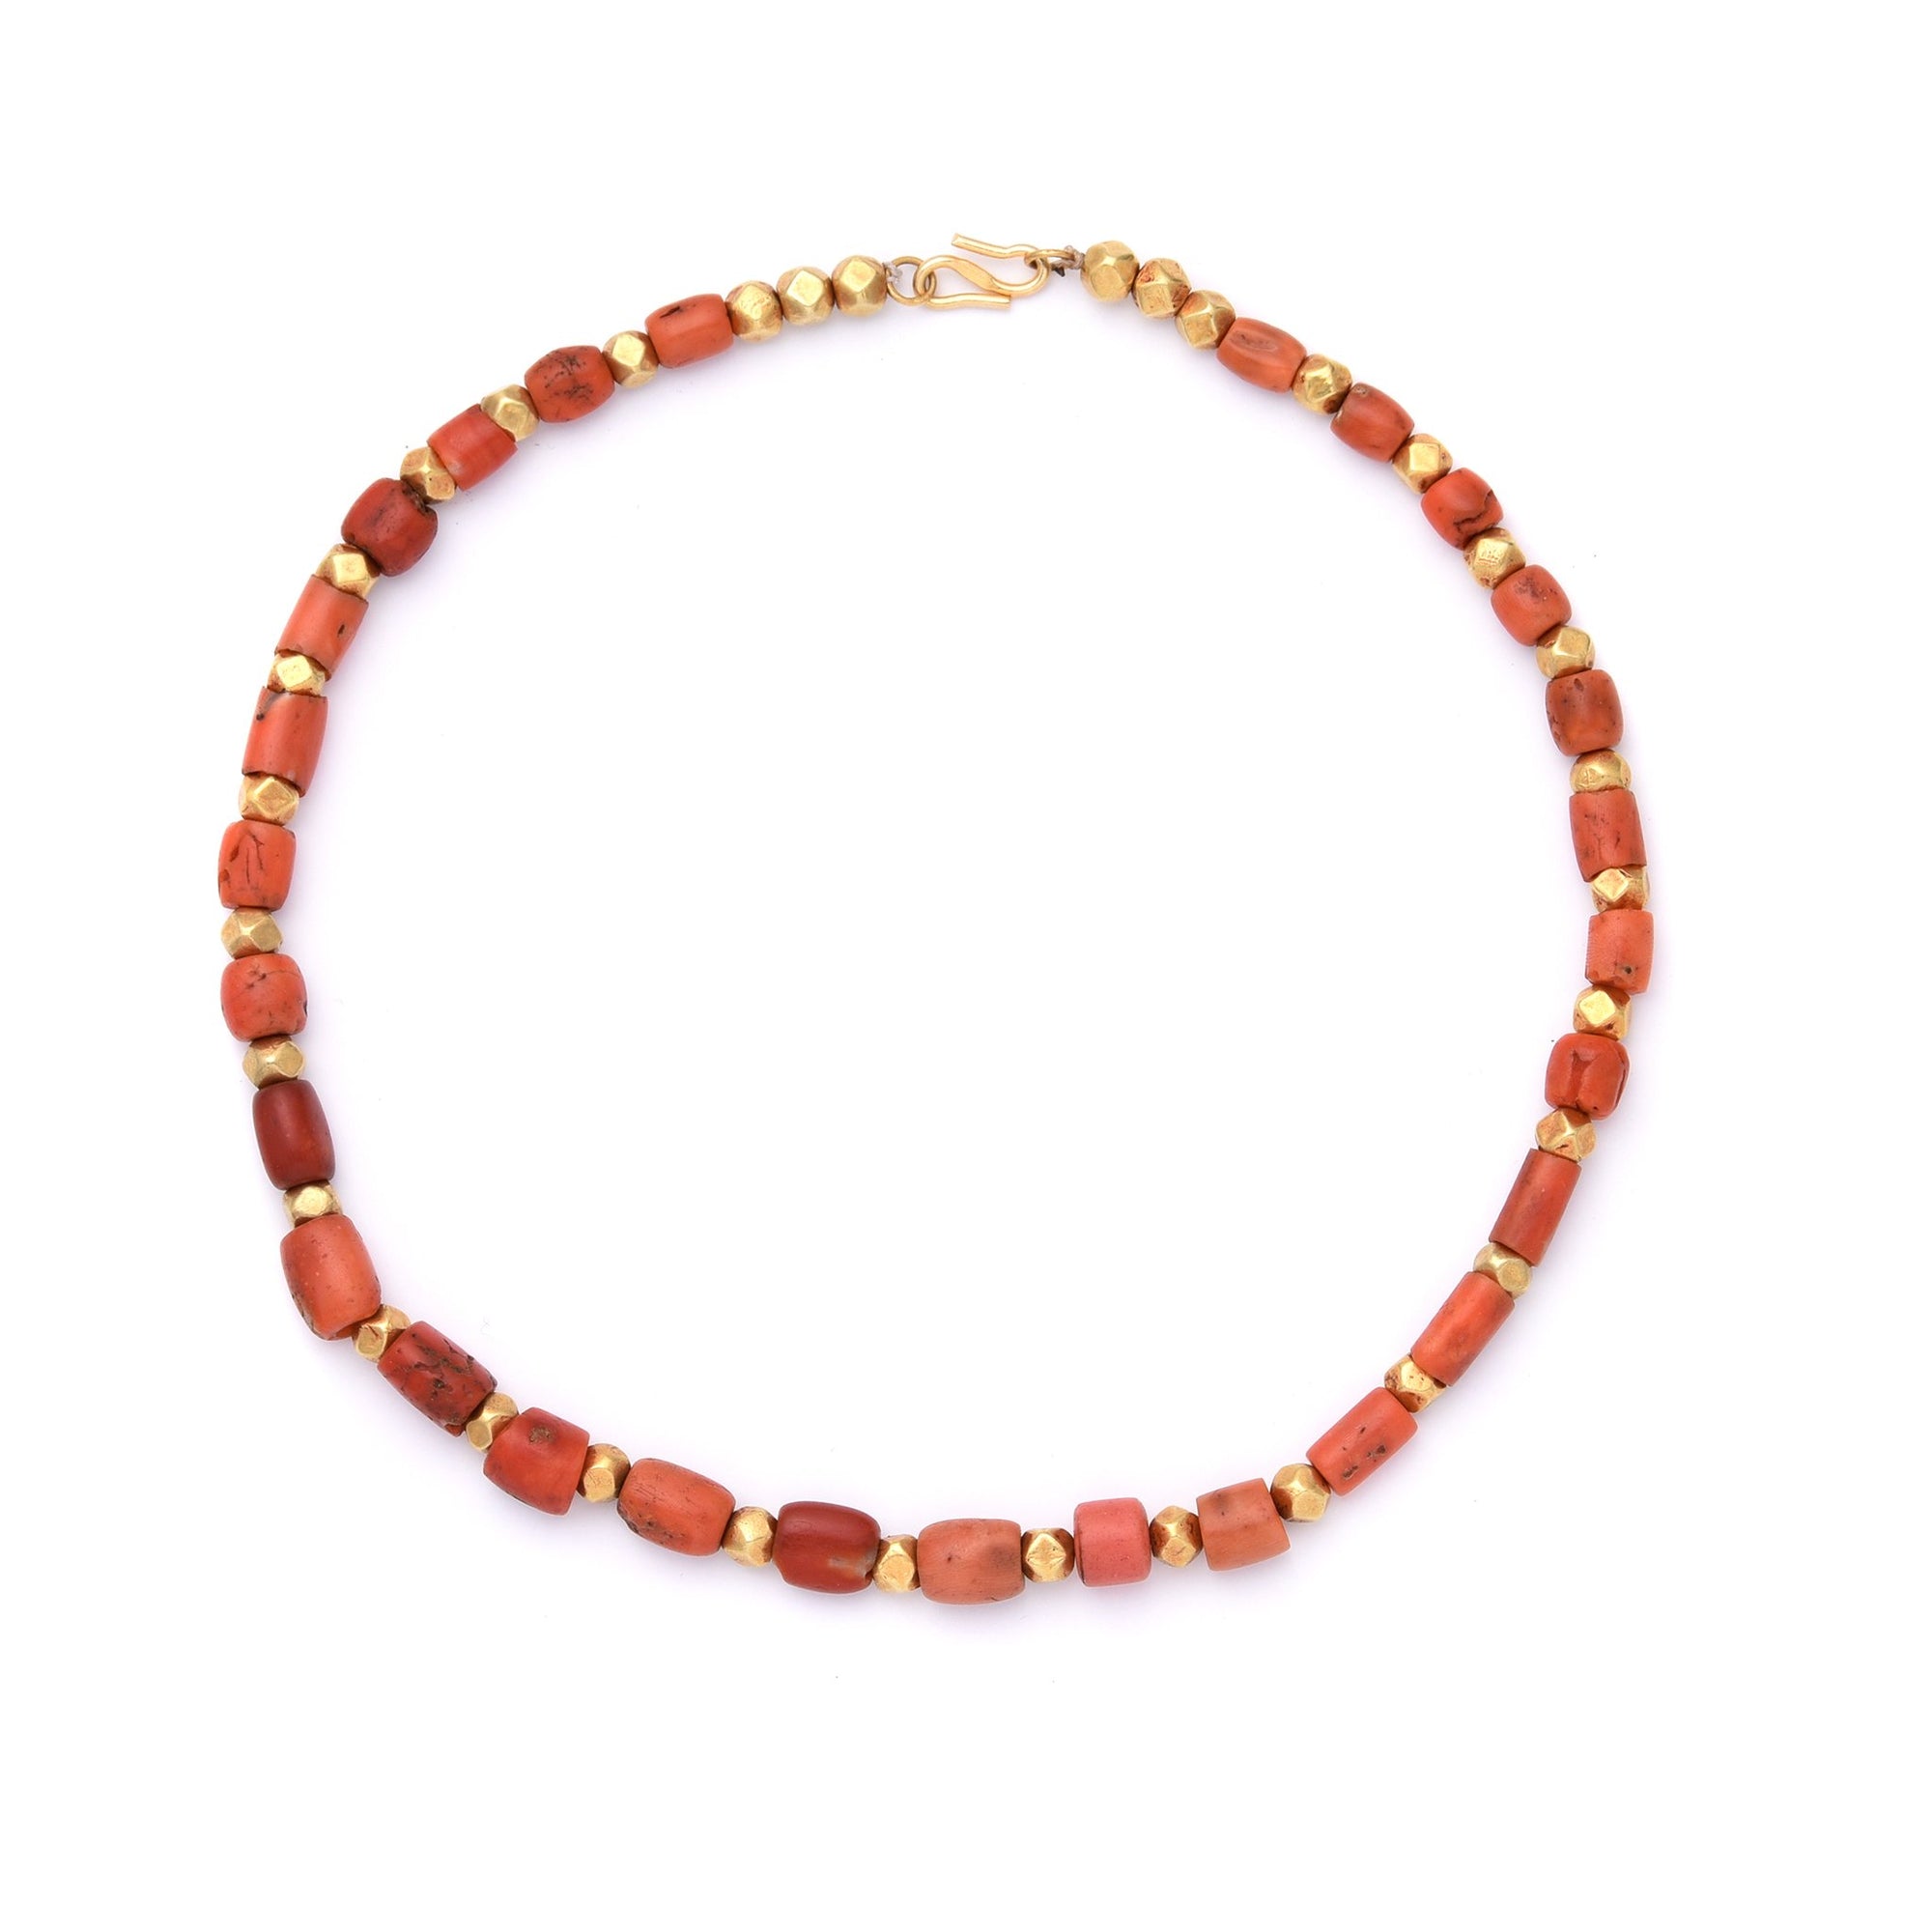 Tibetan Coral & Gold Lacquer Bead Necklace from Old Beads - Length 45 cms. Largest bead dia 1cm - A00635